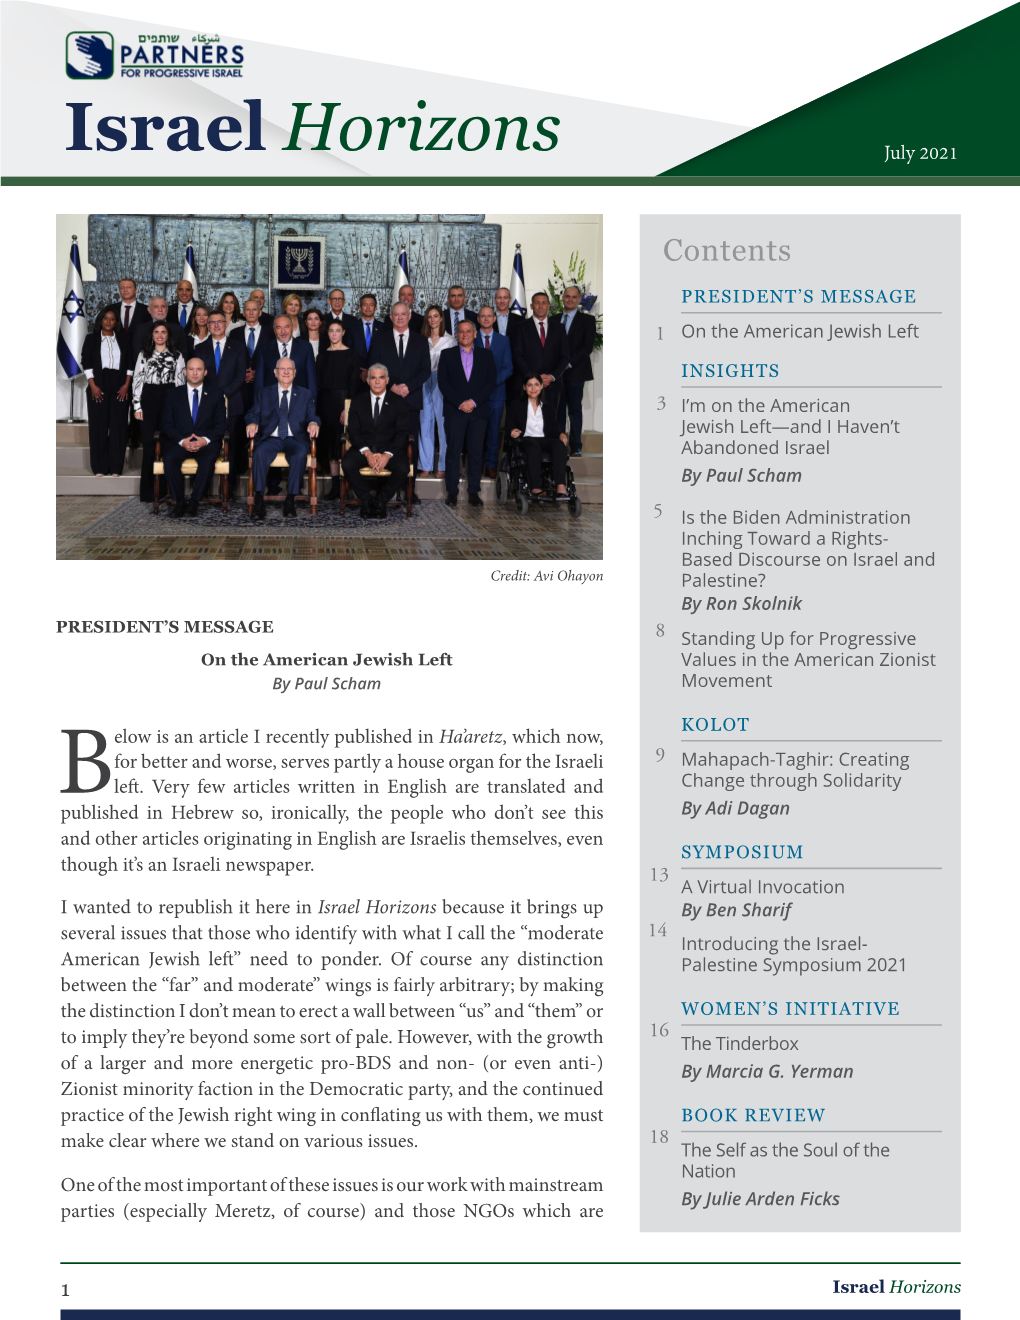 Download Current Issue of Israel Horizons